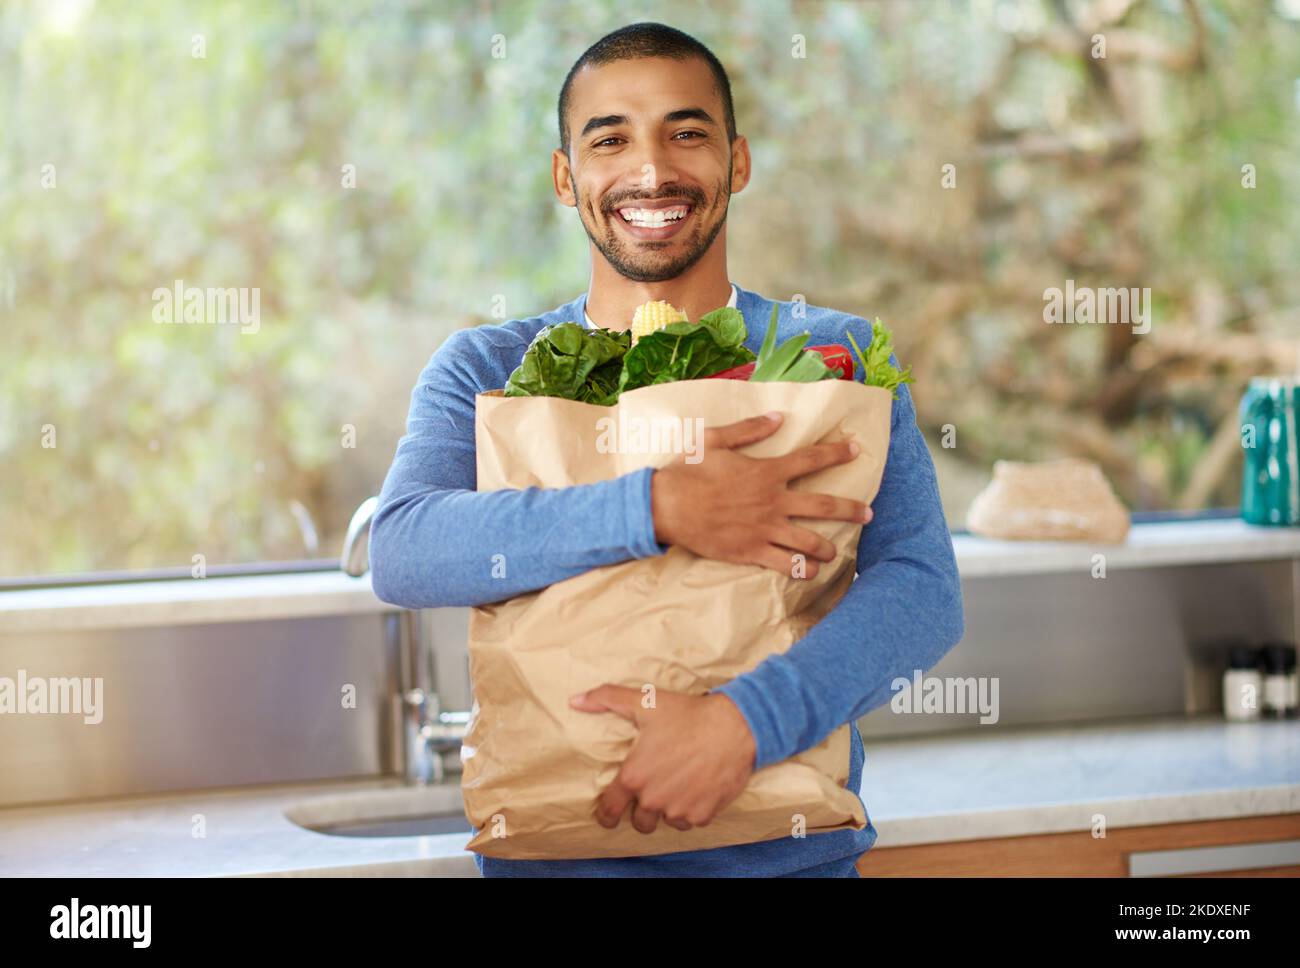 Starting my new organic diet. Cropped portrait of a handsome young man standing in the kitchen with his groceries. Stock Photo